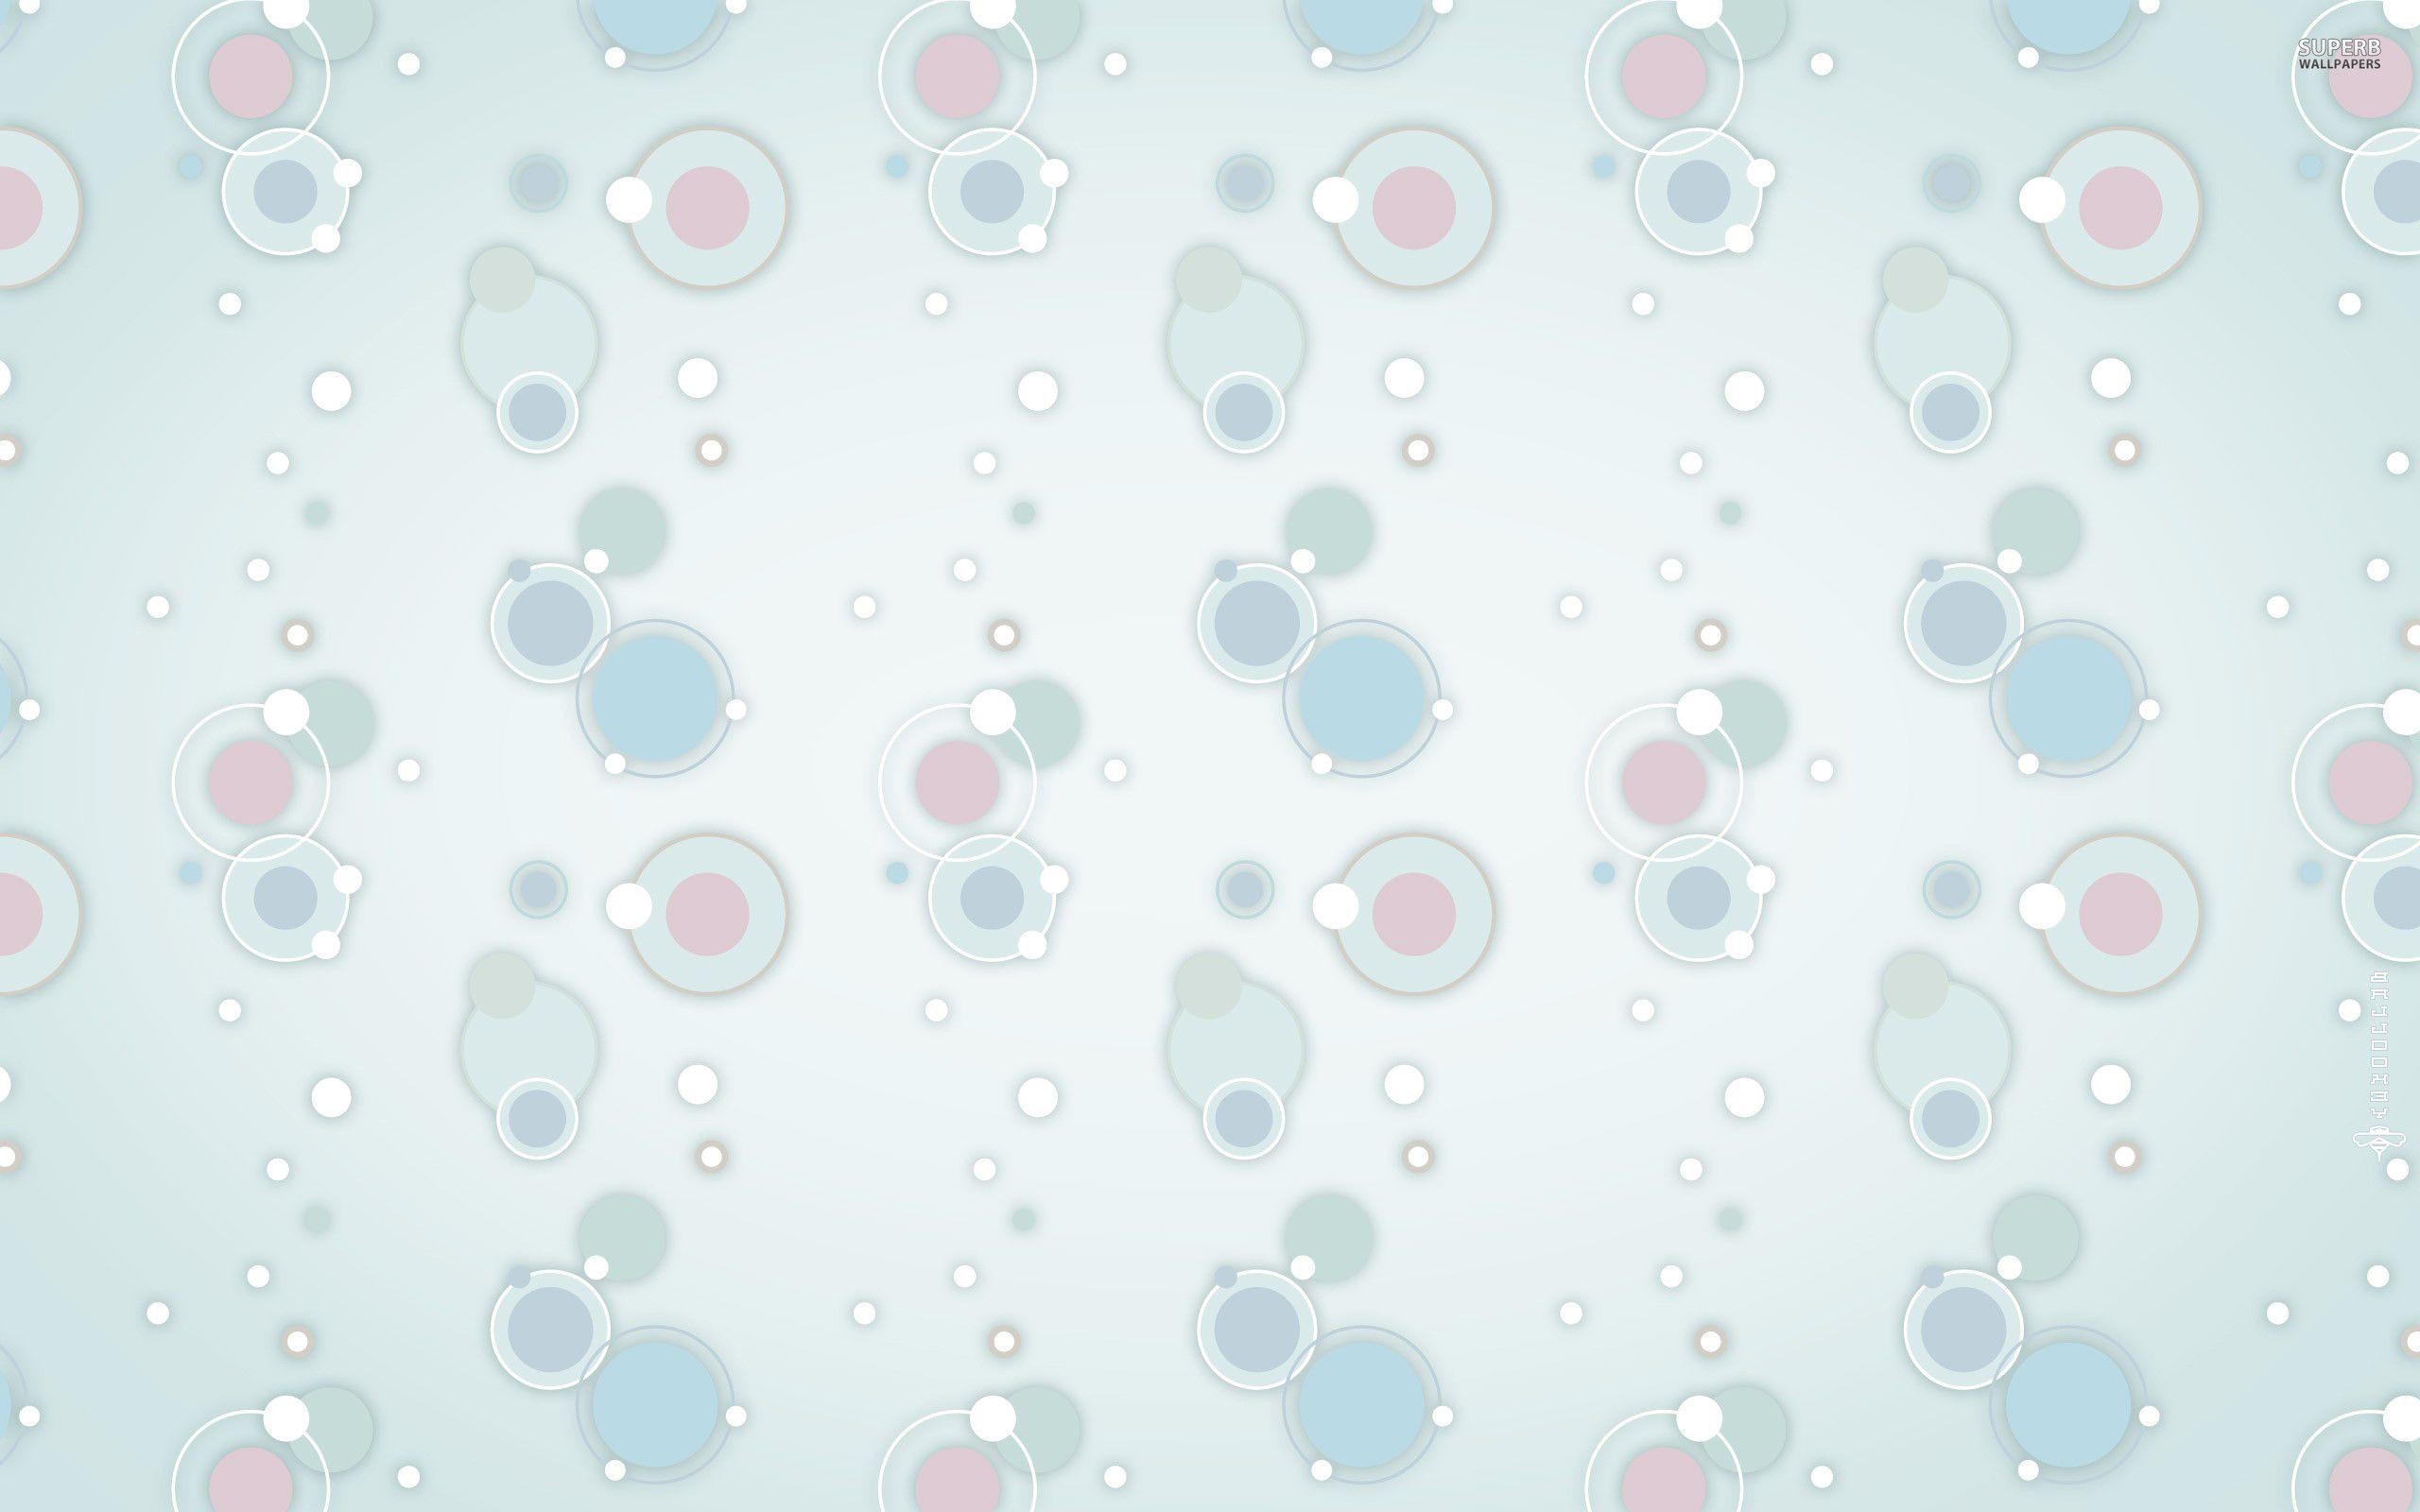 2560x1600 Pastel Colors Wallpapers Amxxcs Ru Colored Circles Wallpaper Abstract.  animal print rooms. what is ...